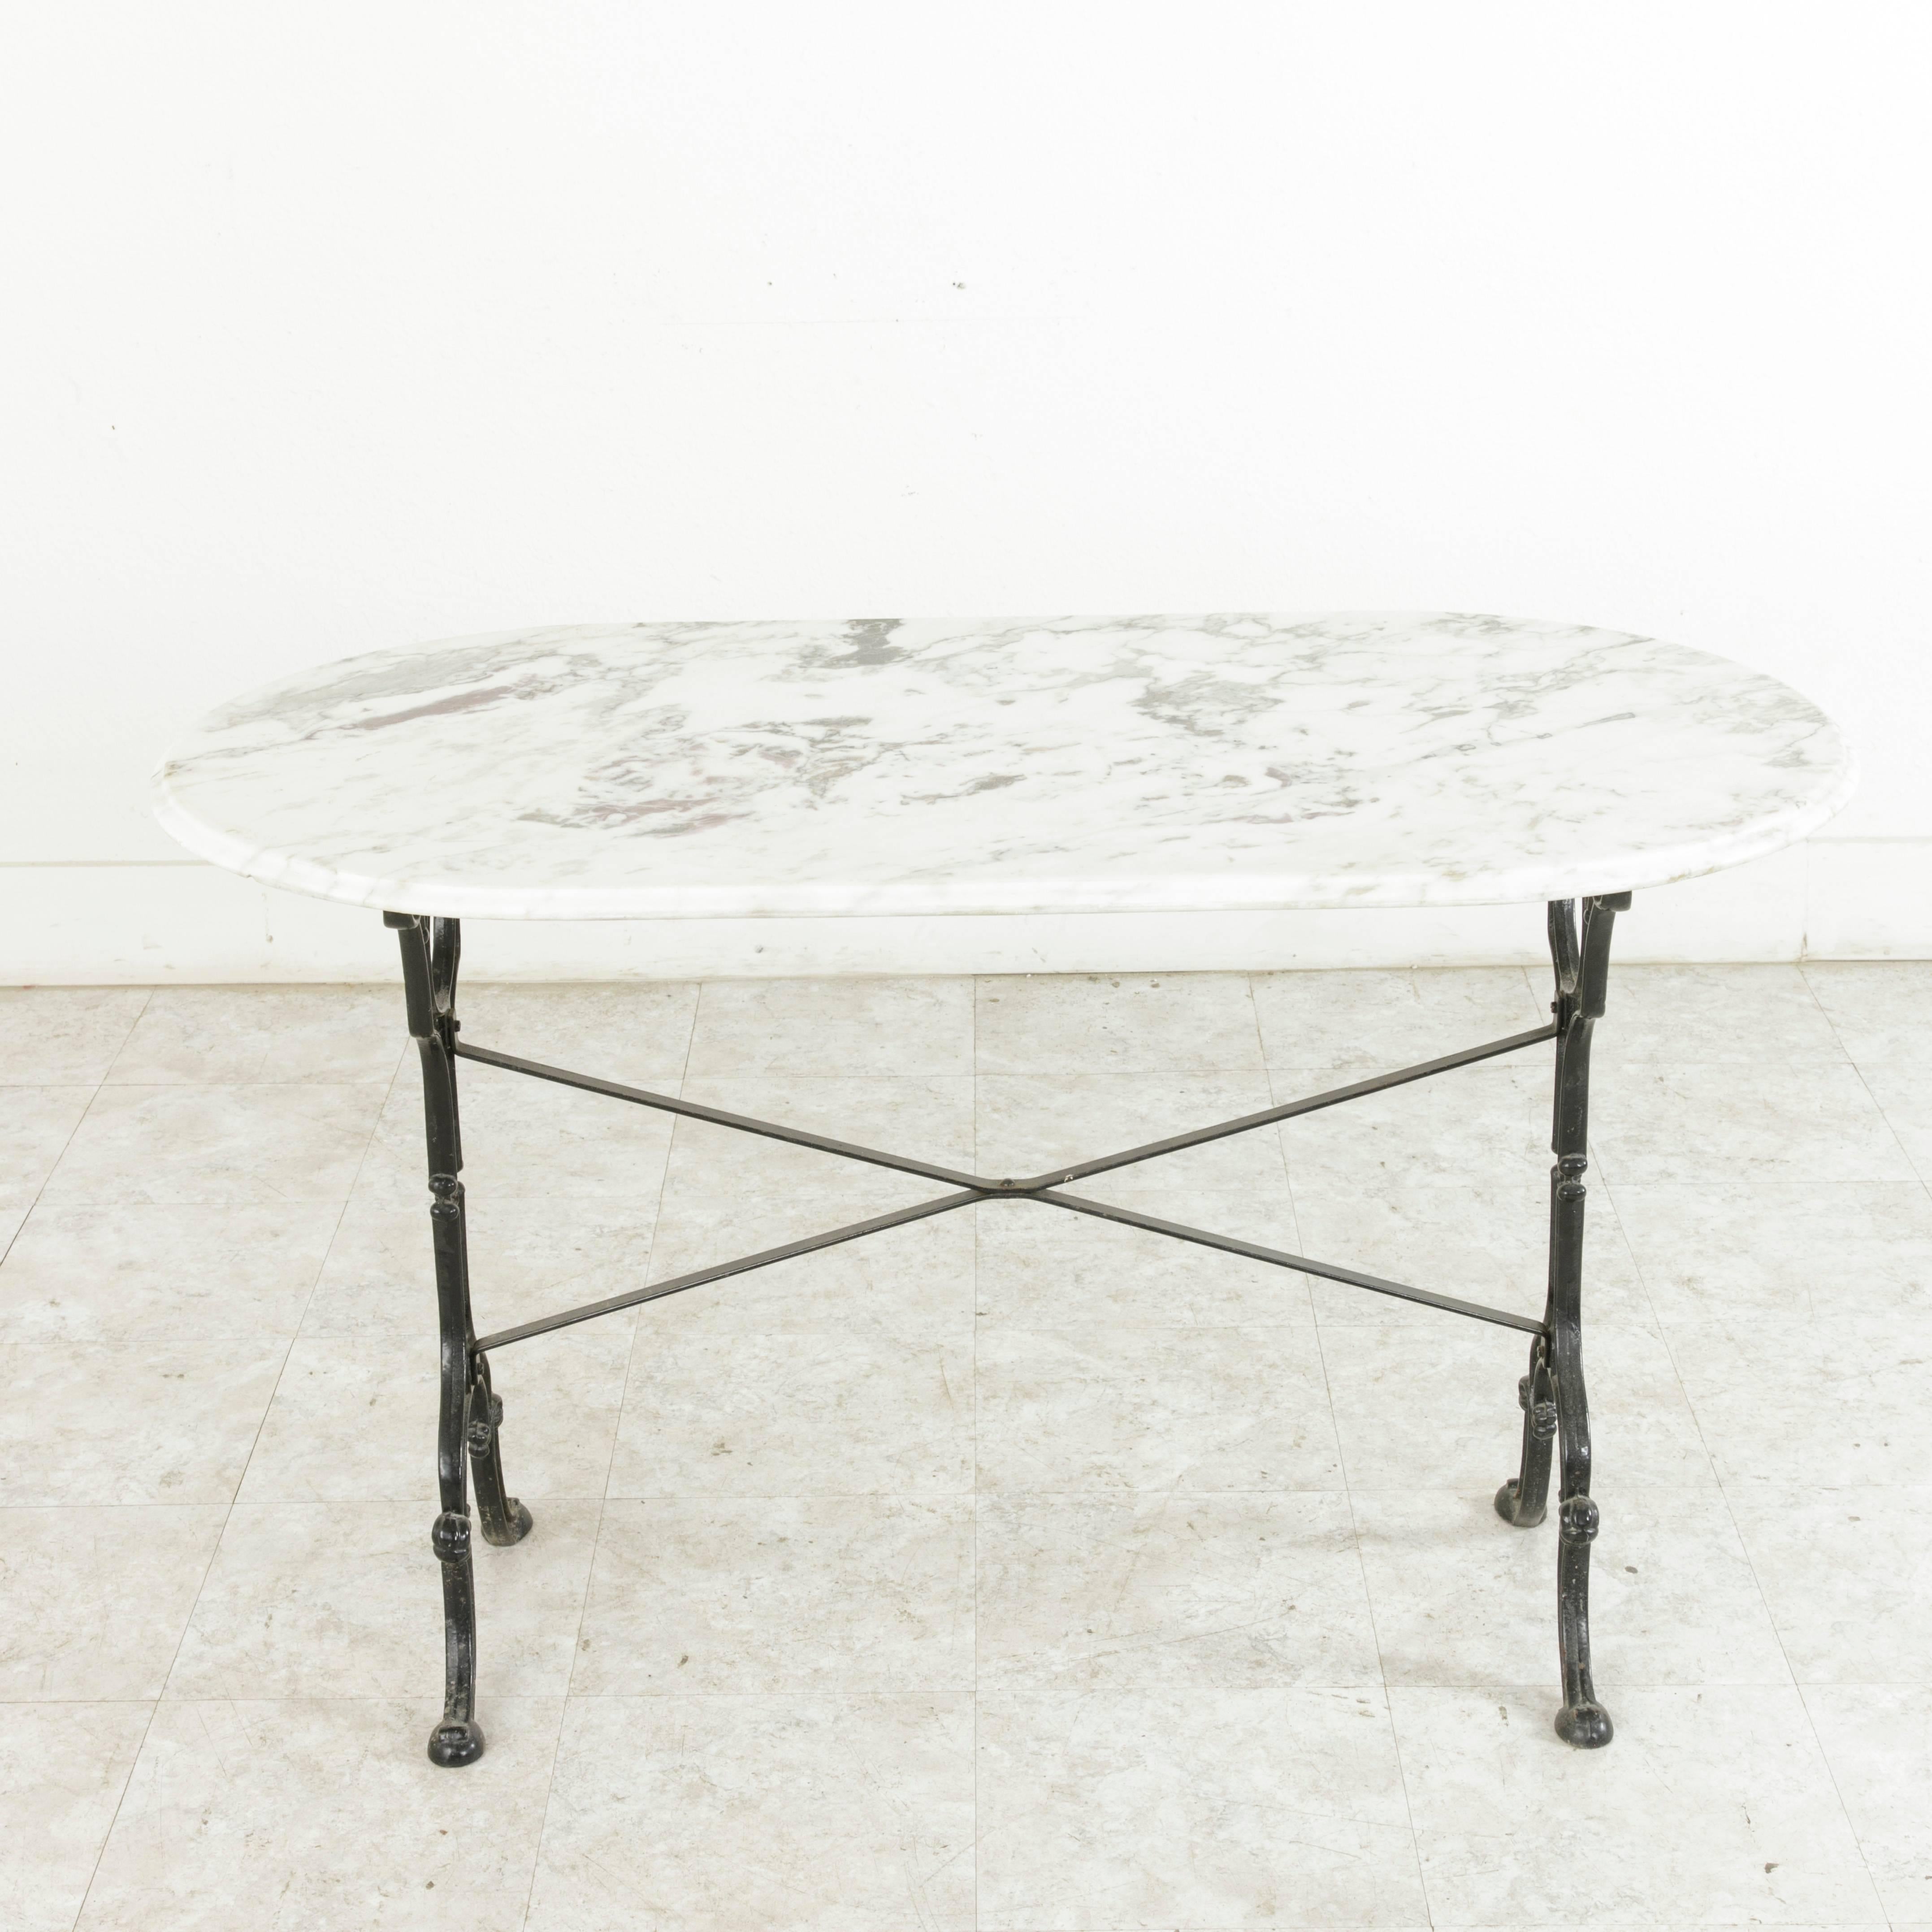 This early 20th century French cast iron bistro table features a bevelled oval white marble top enhanced by purple and grey veining. The curved legs adorned with rosettes and shells are joined by an X-stretcher that provides extra stability to the